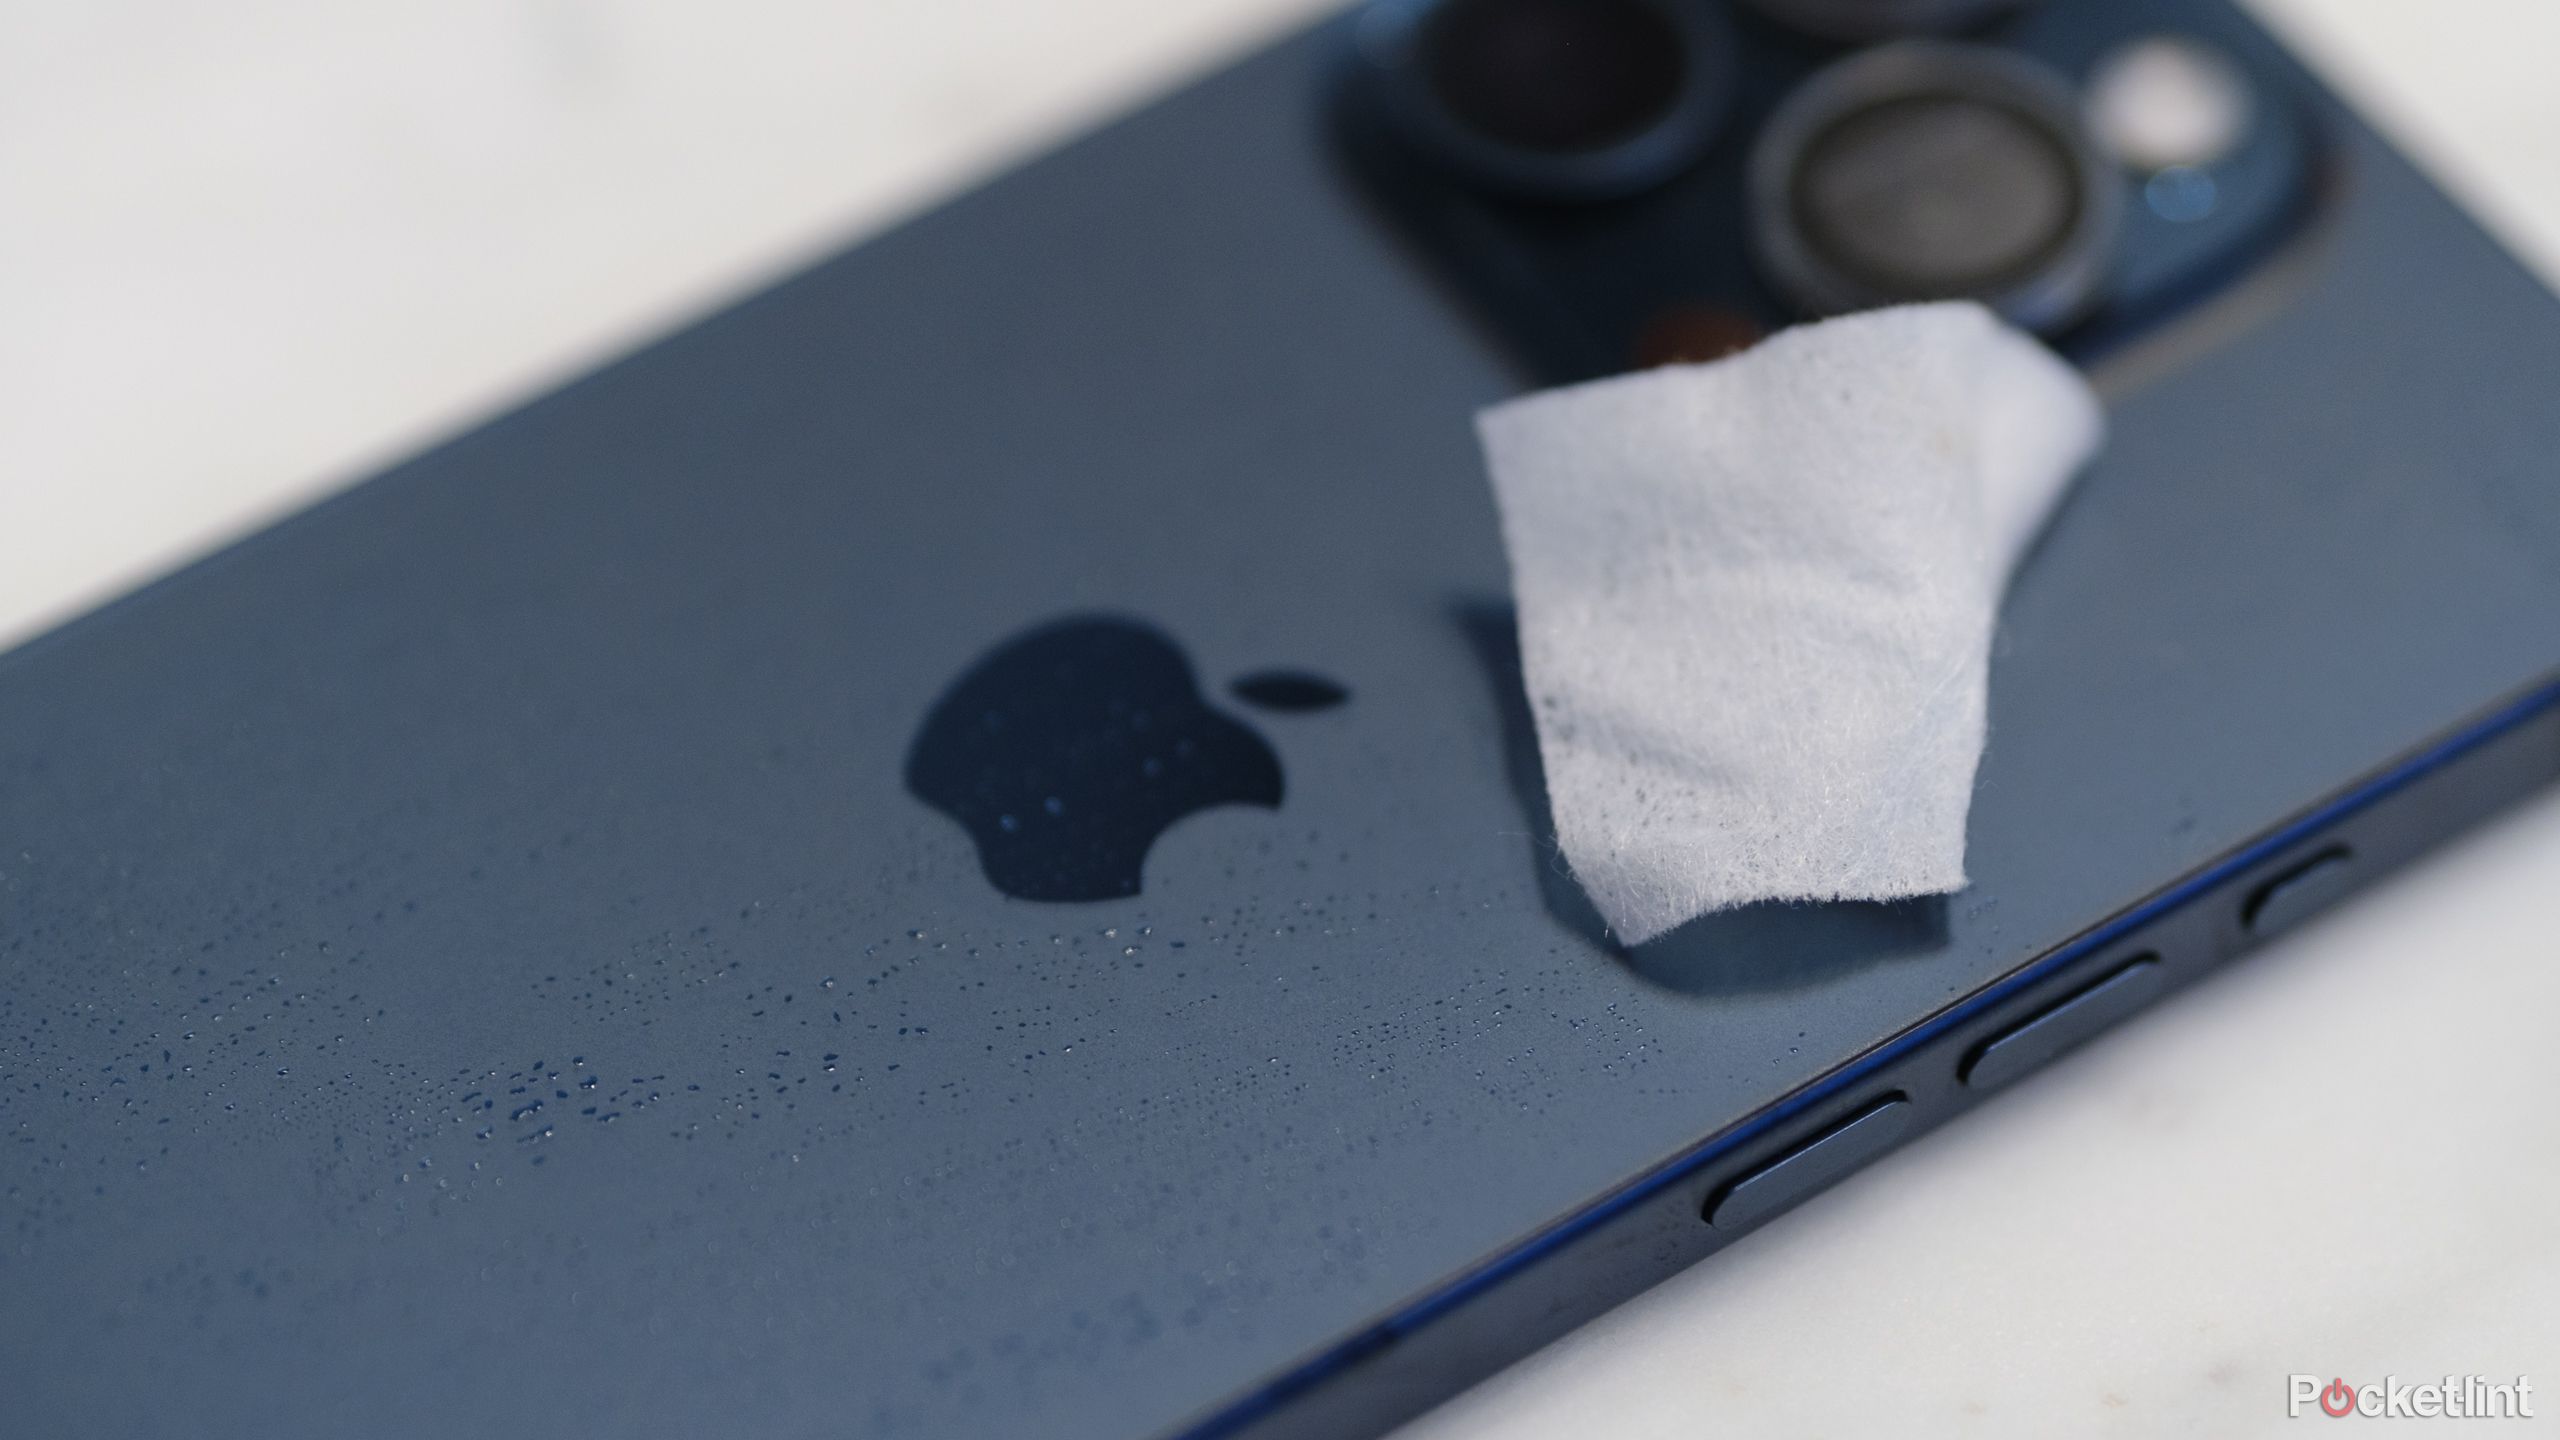 A photograph of a cleaning wipe on an iPhone